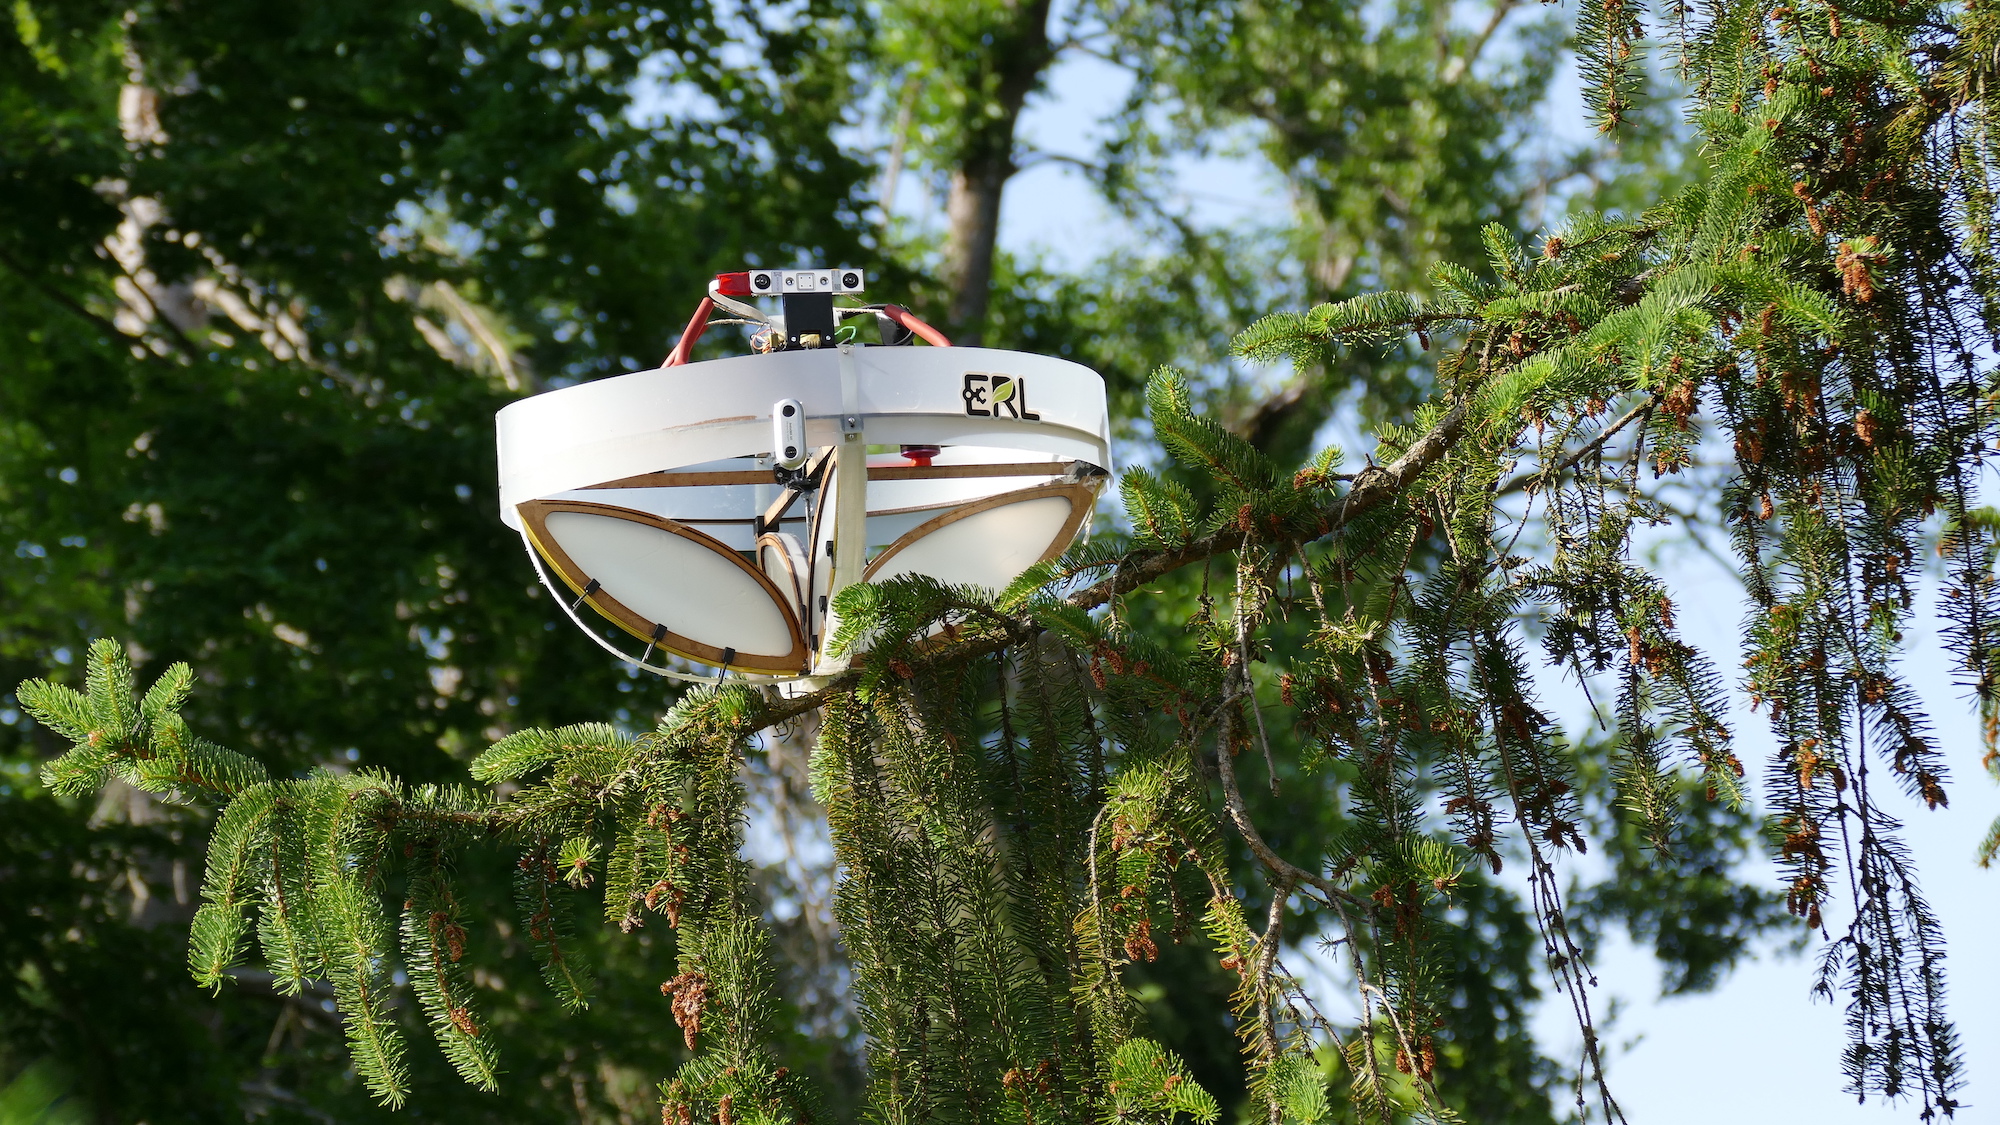 It’s not a UFO—this drone is scooping animal DNA from the tops of trees